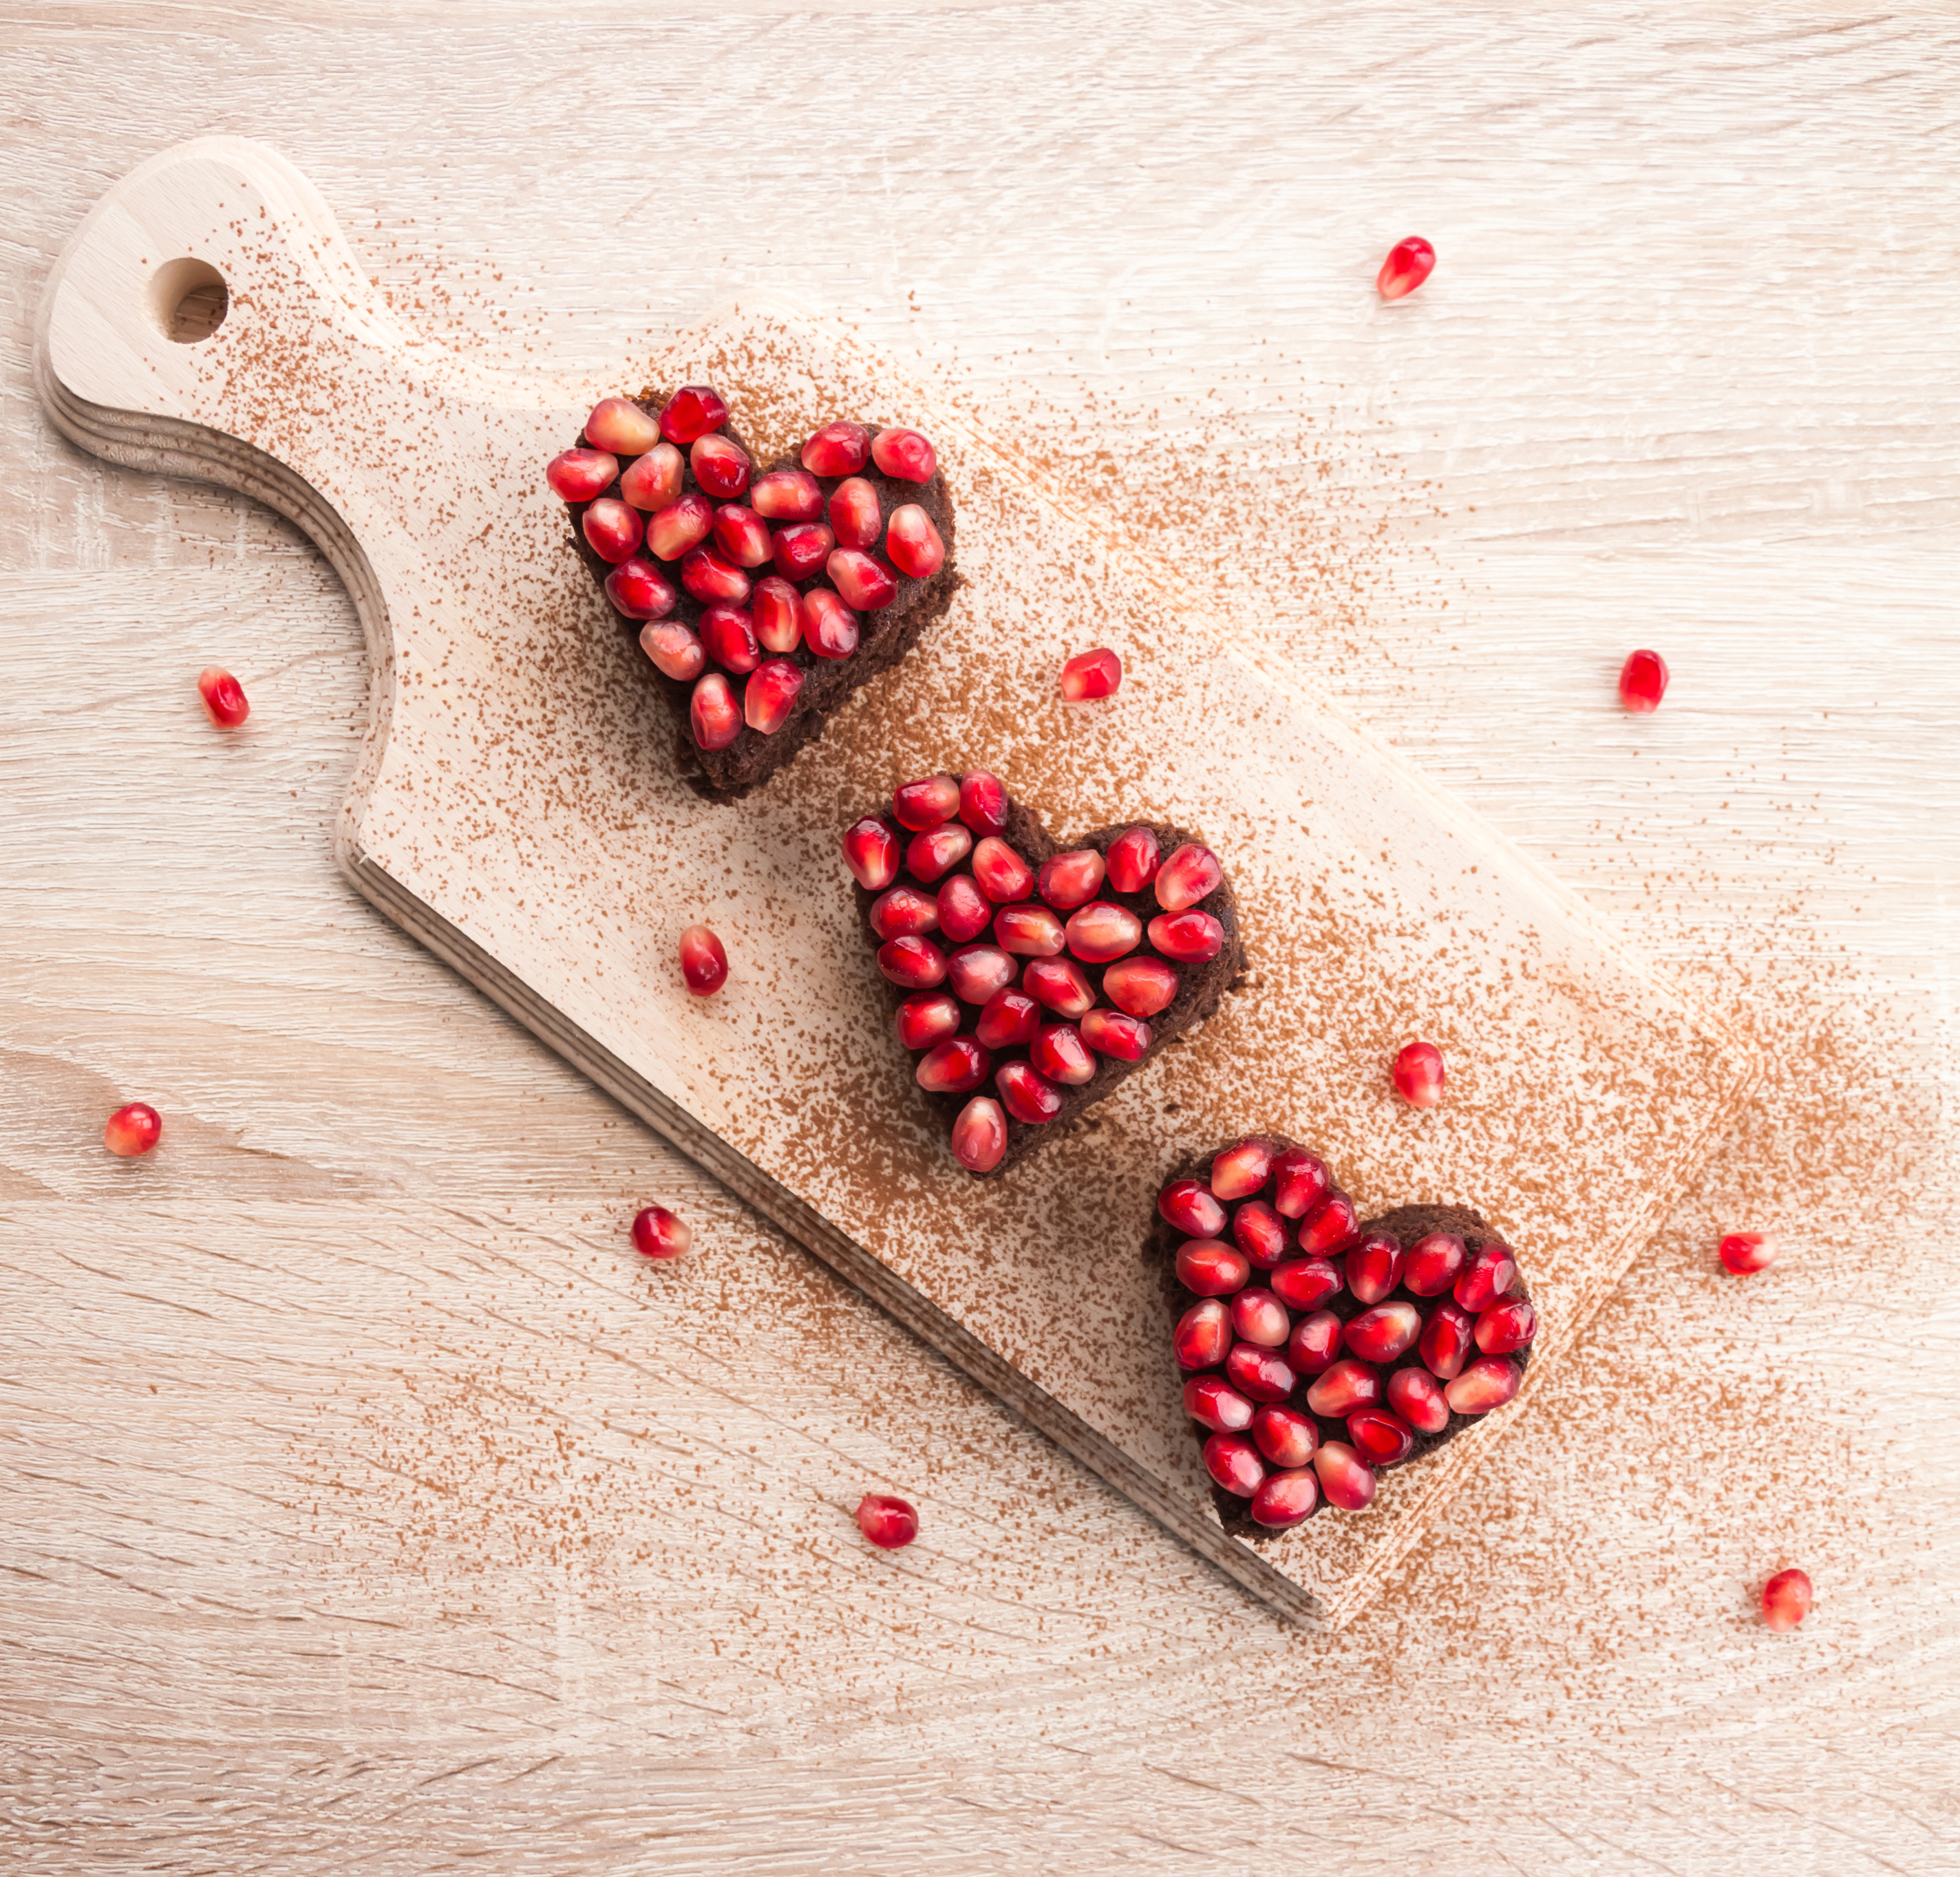 Sweet & Healthy Valentine’s Day Desserts You’ll Love